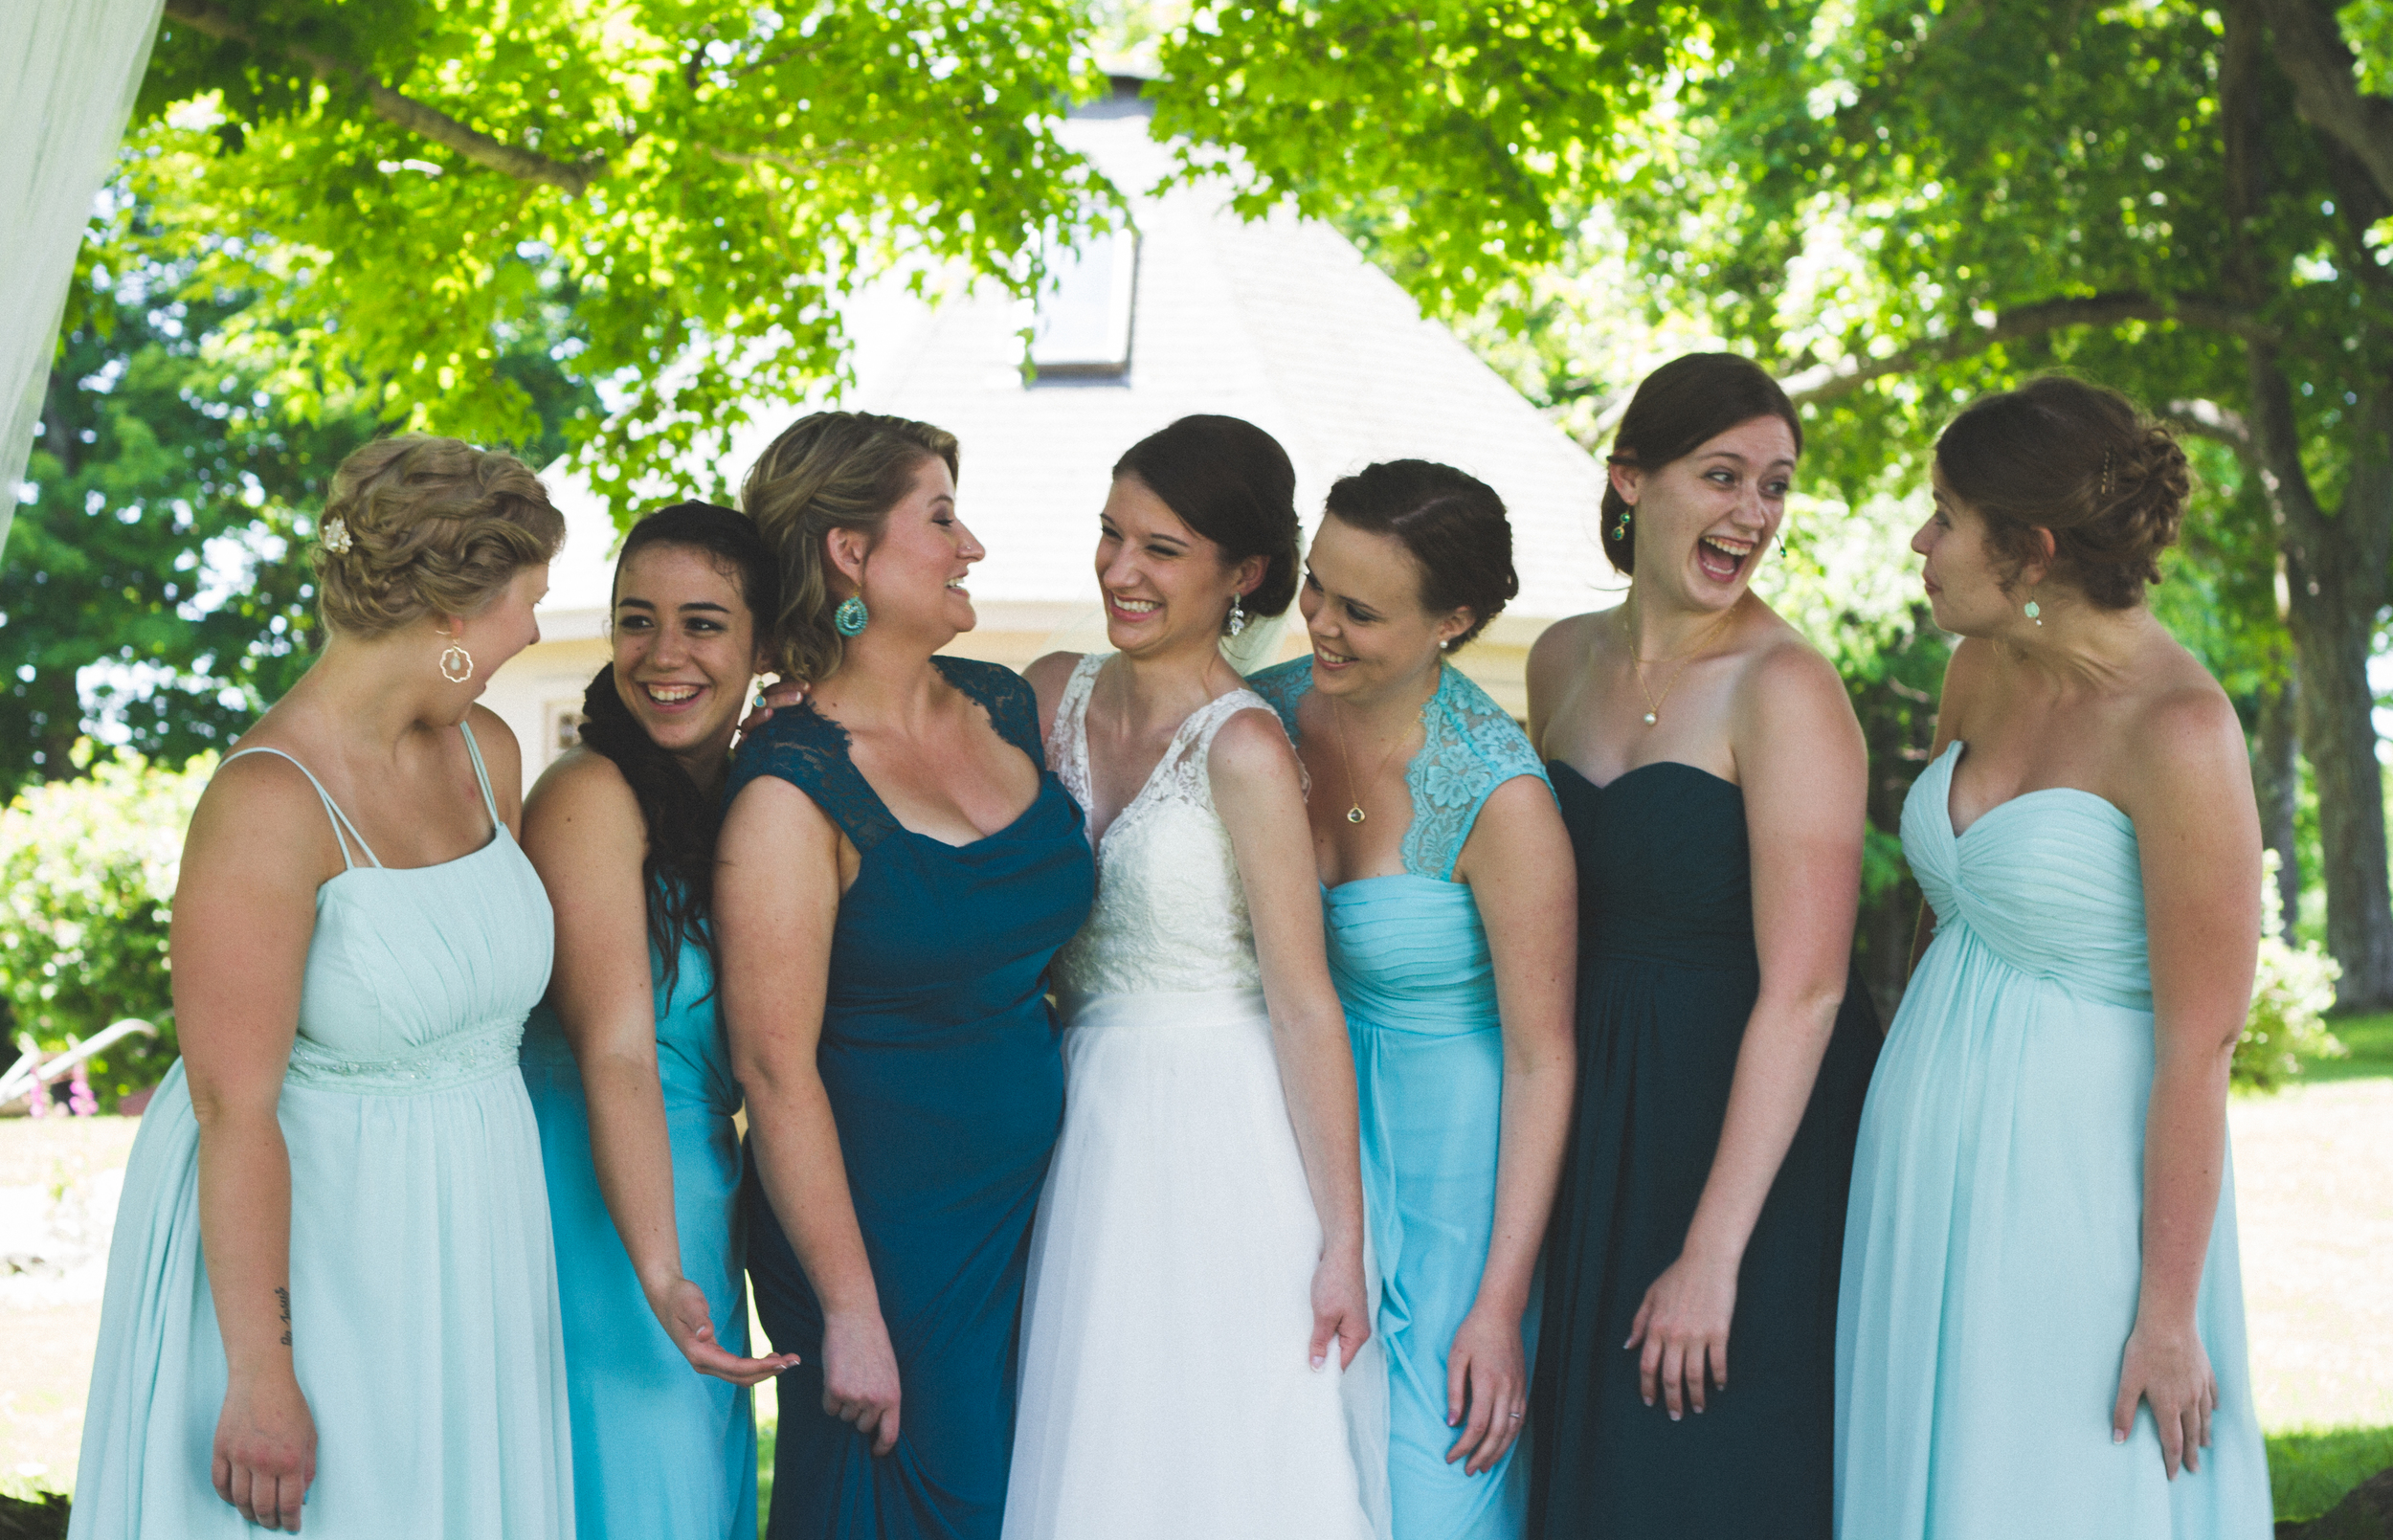 Bridesmaids at Bliss Farm in Granville, Massachusetts. Sweet Alice Photography.